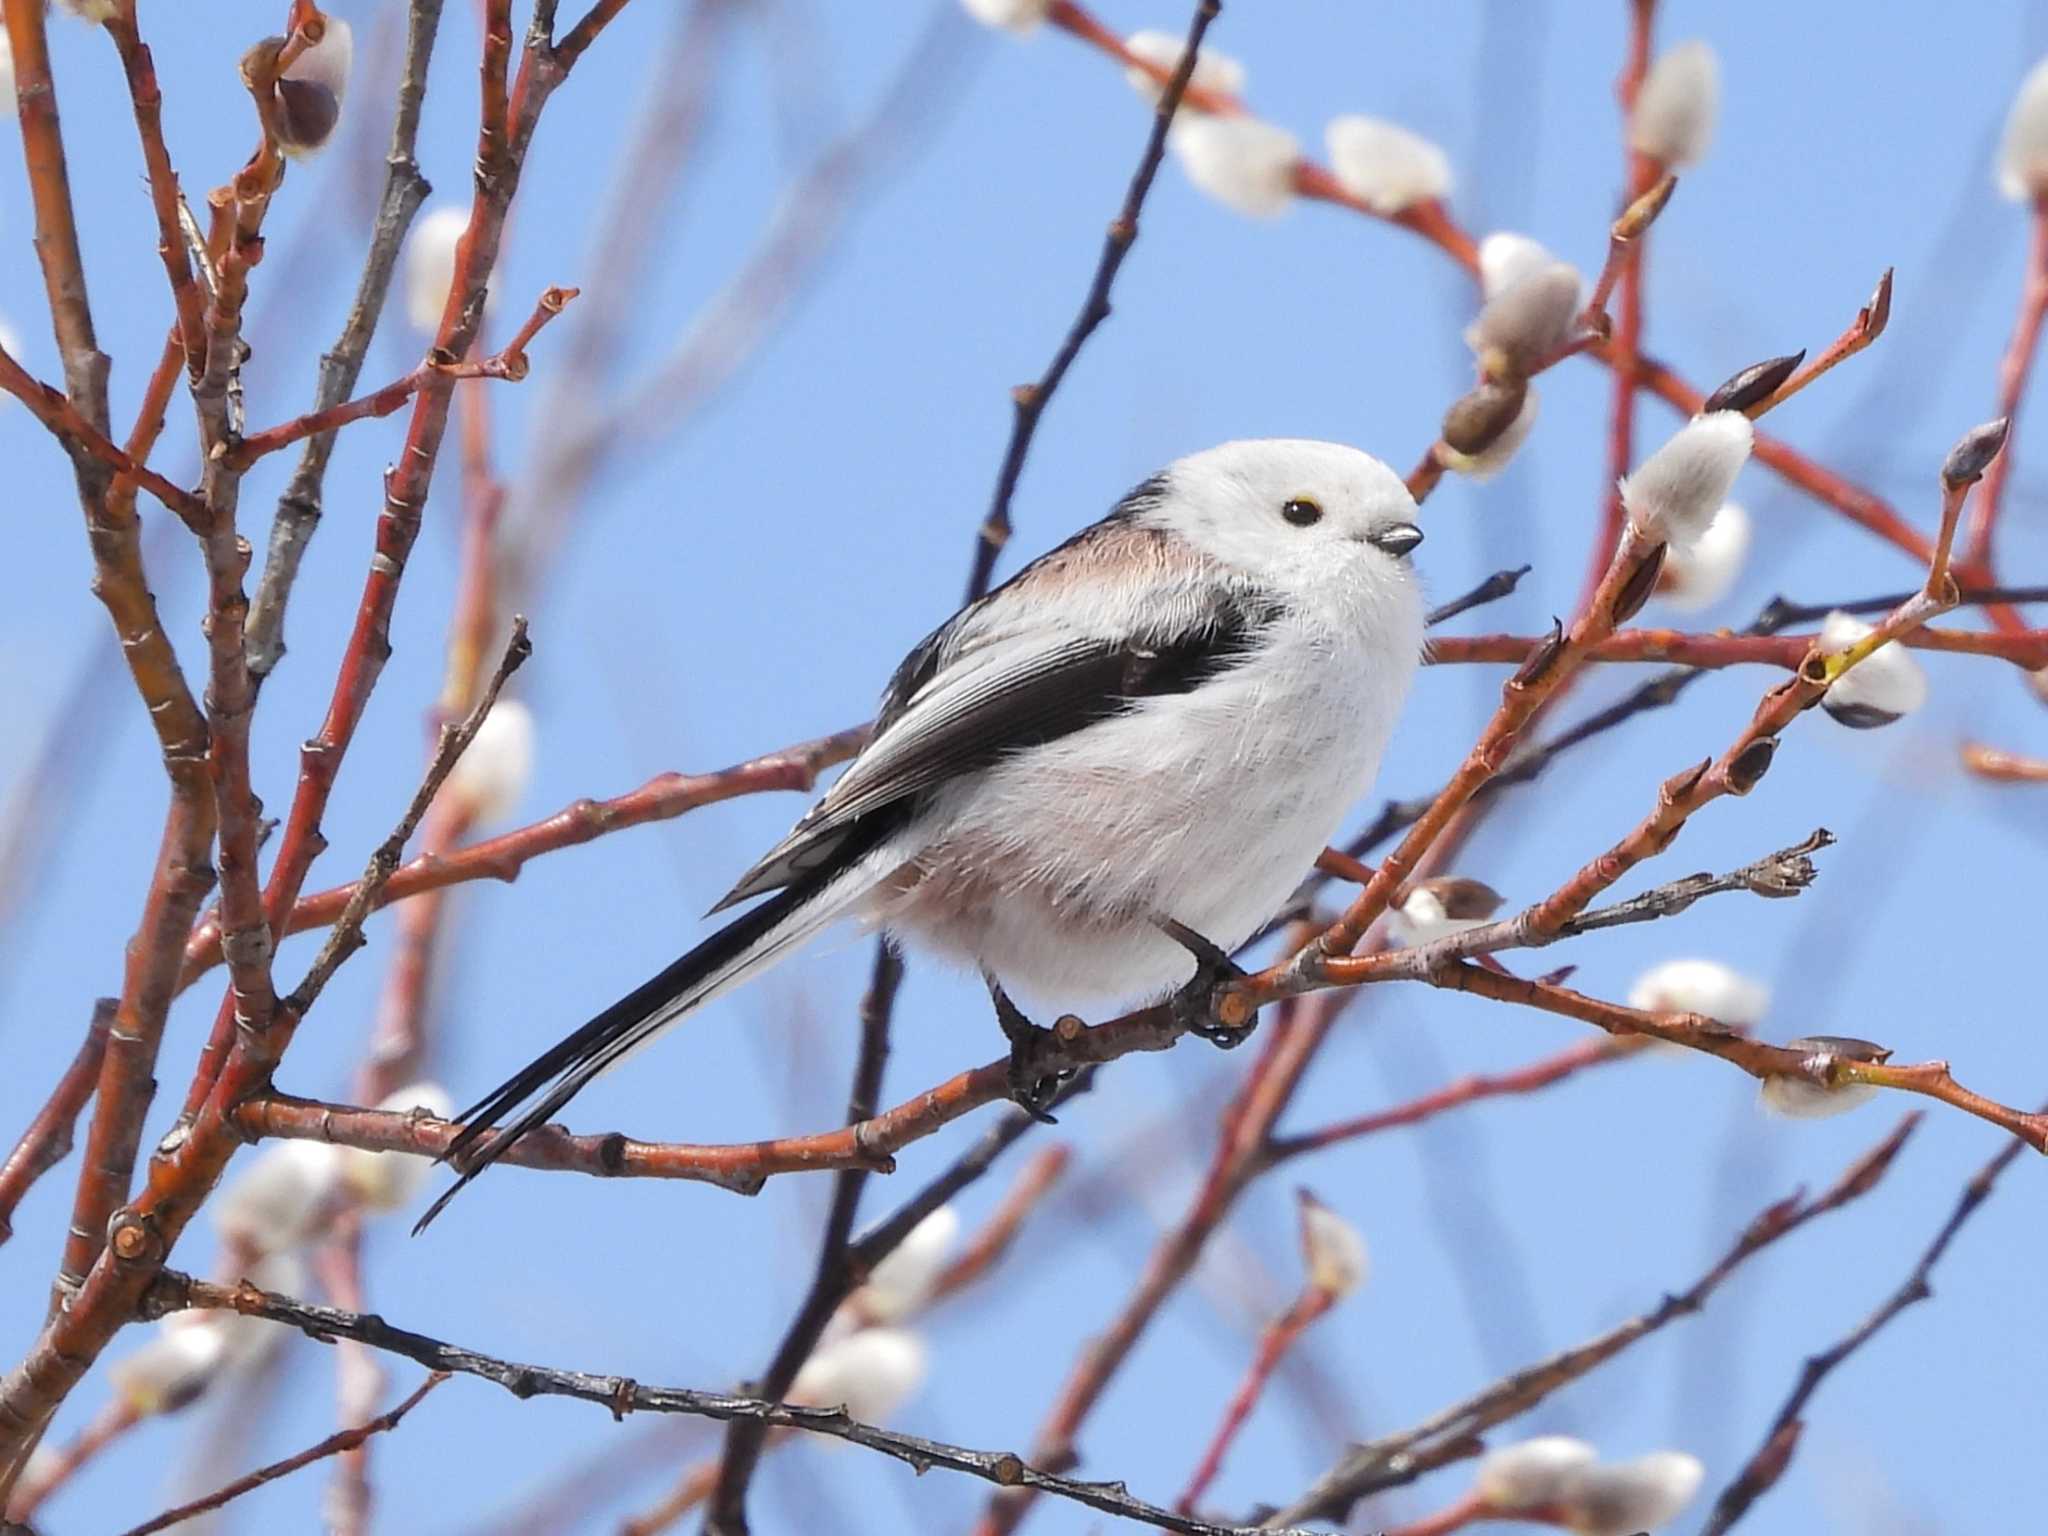 Photo of Long-tailed tit(japonicus) at Makomanai Park by ゴト